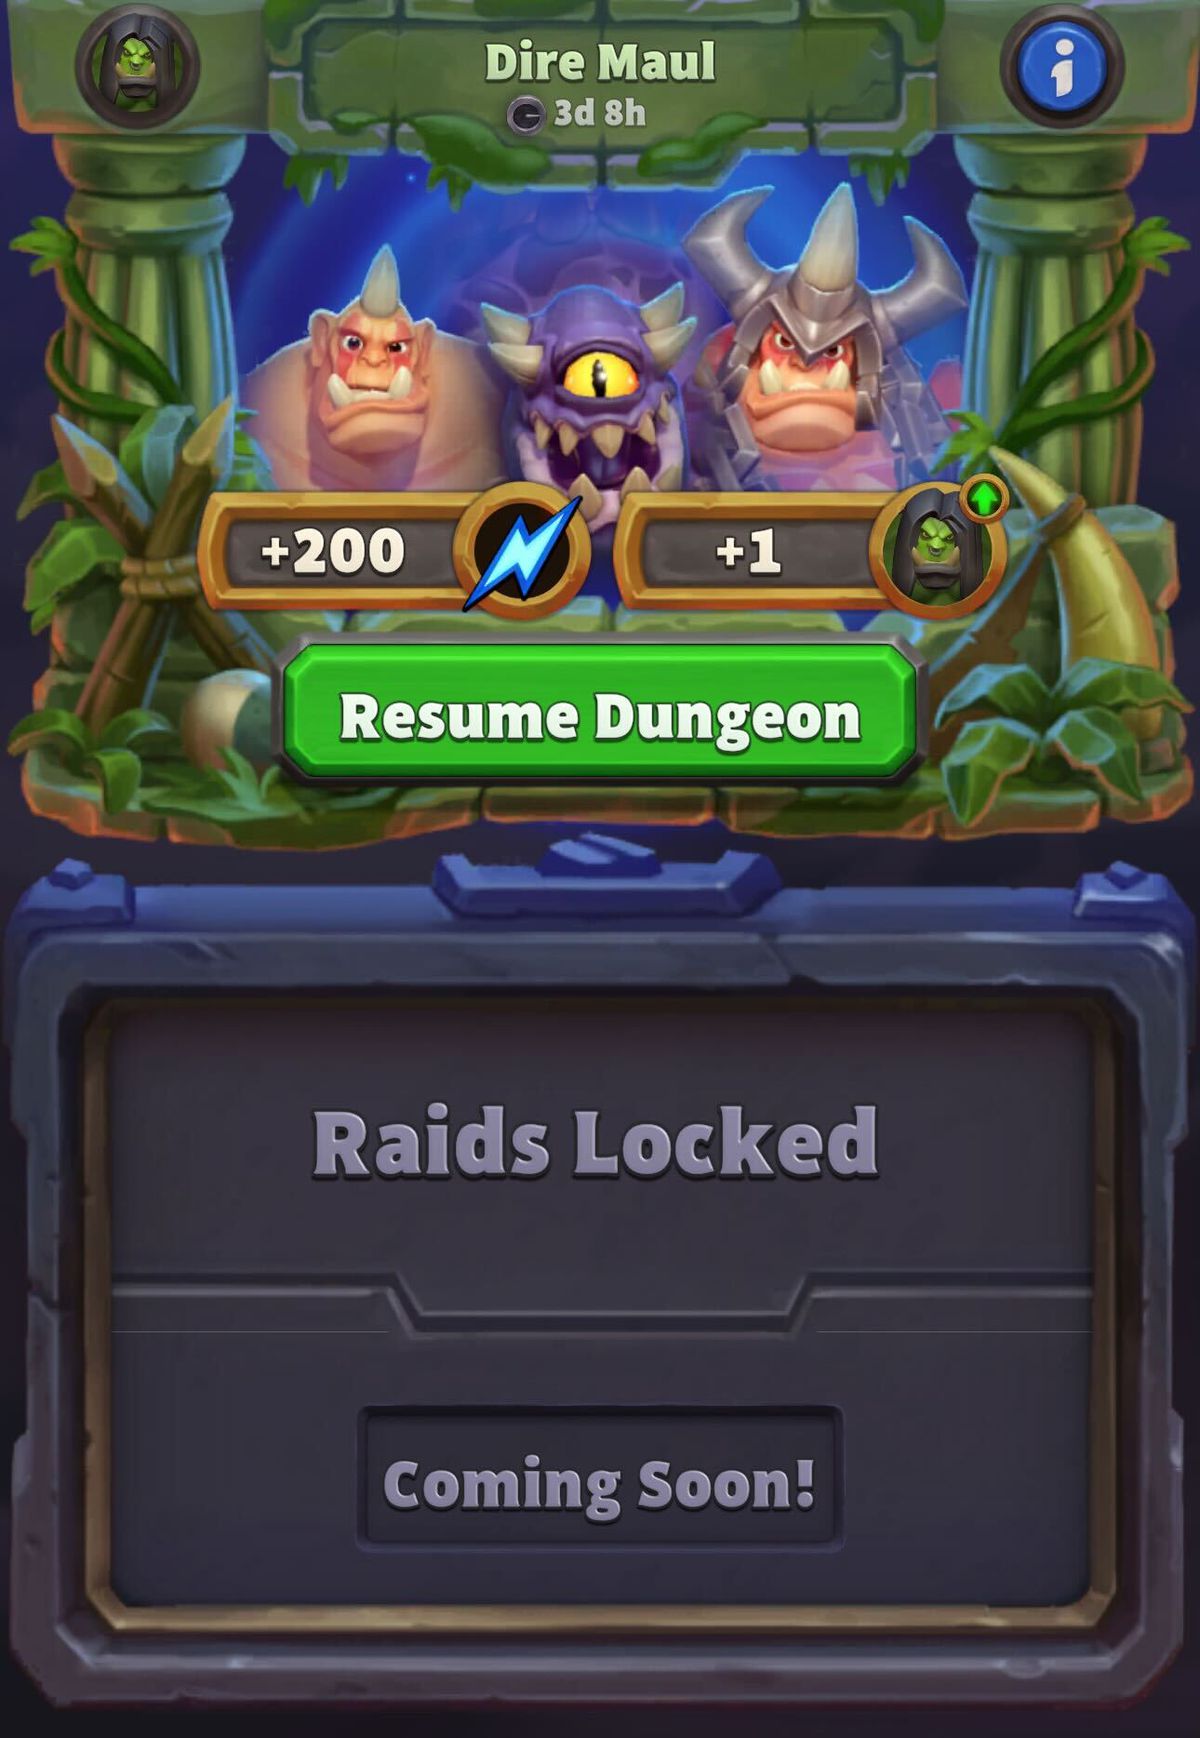 The Dungeon screen shows Dire Maul in Warcraft Rumble